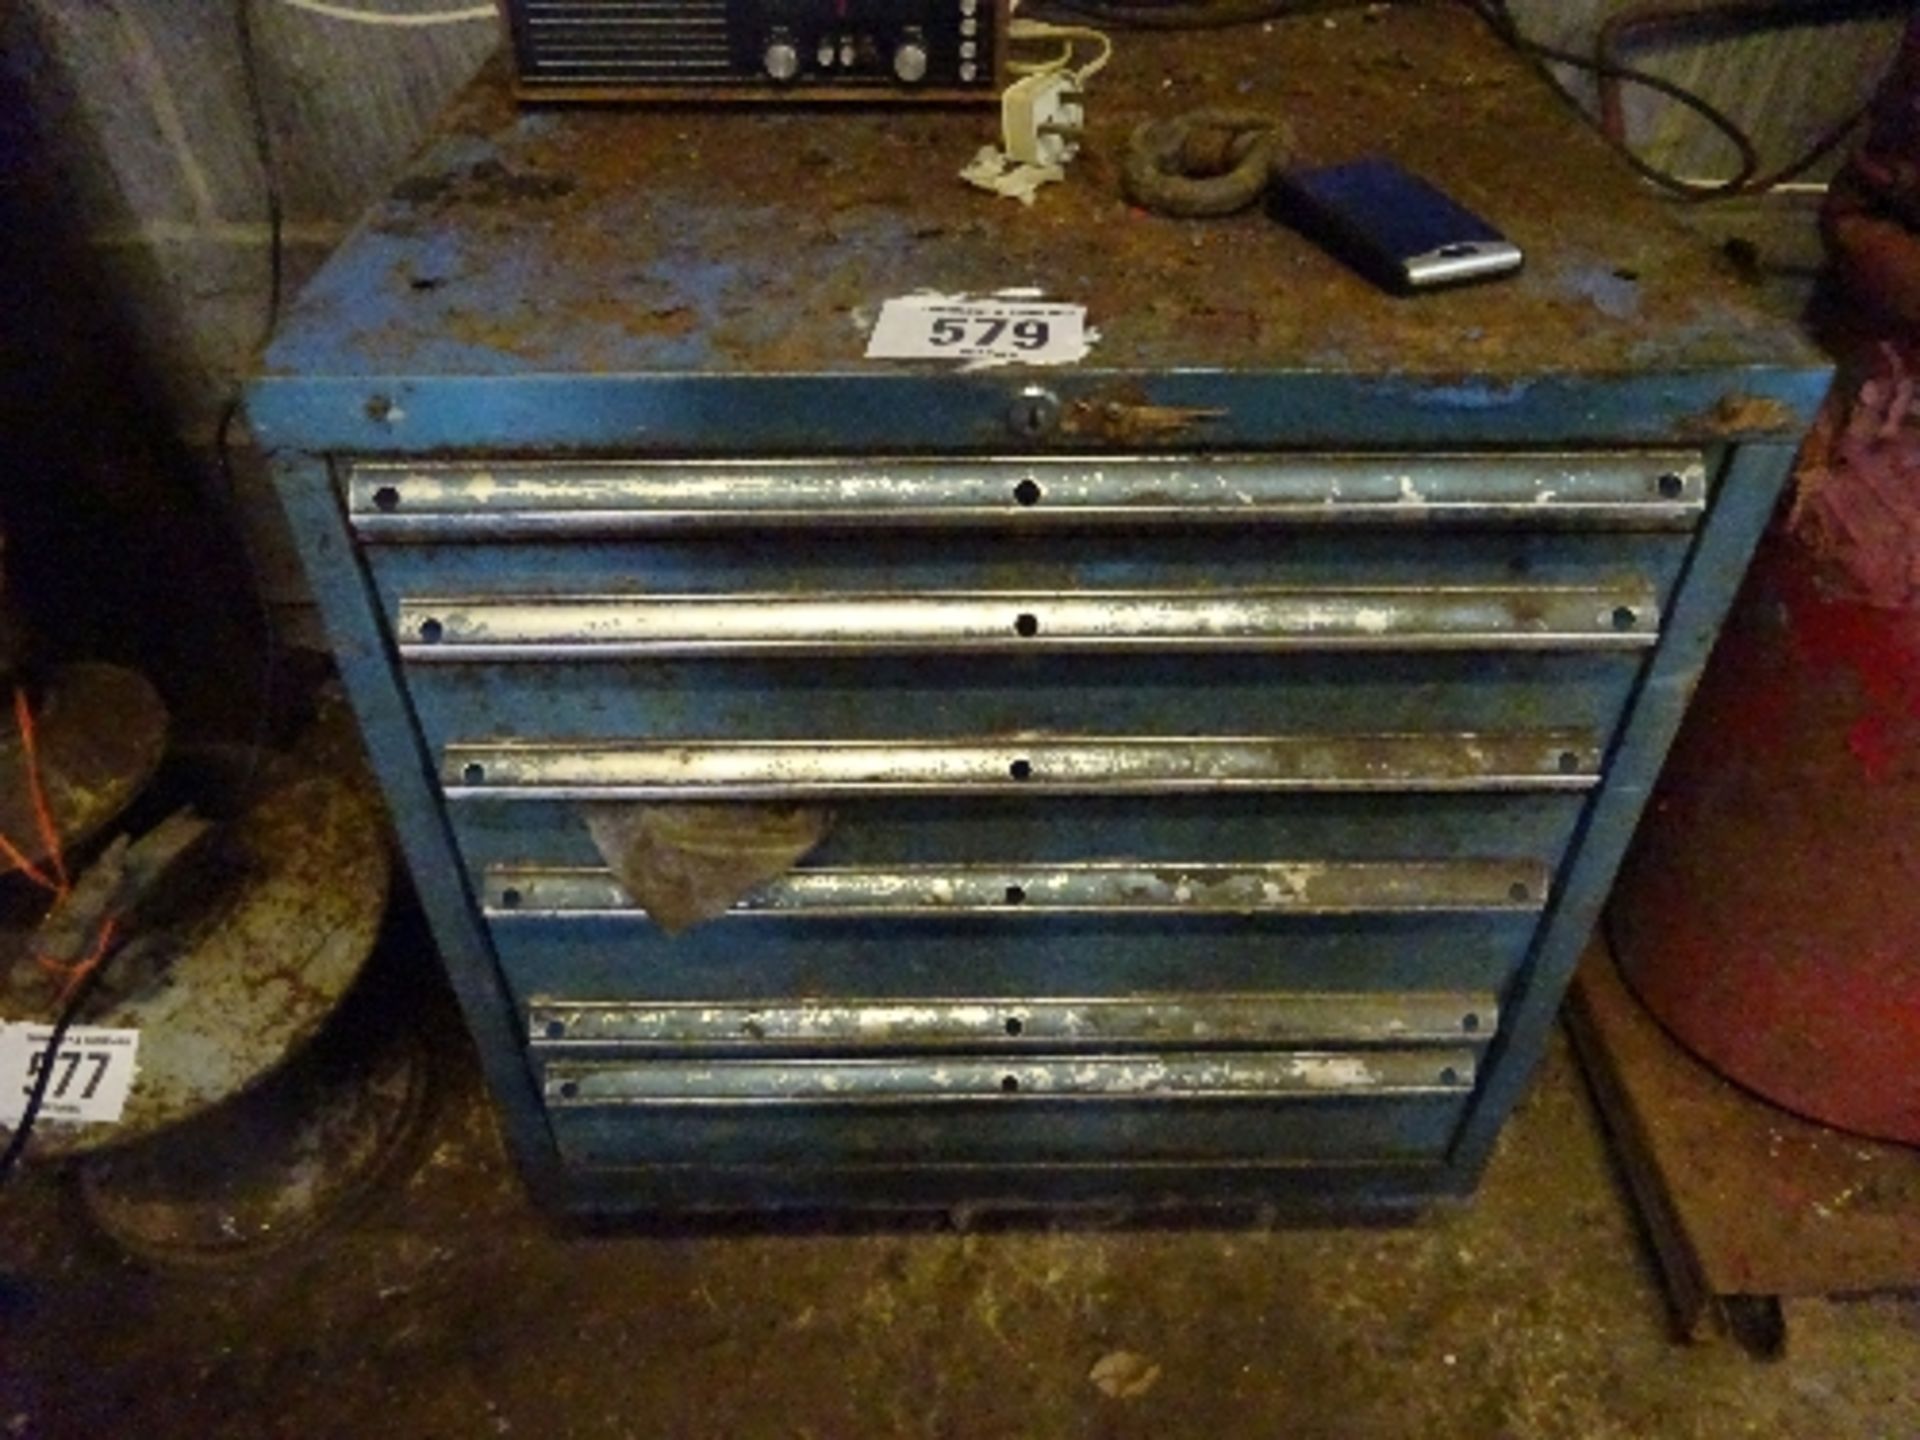 Tool cabinet and contents